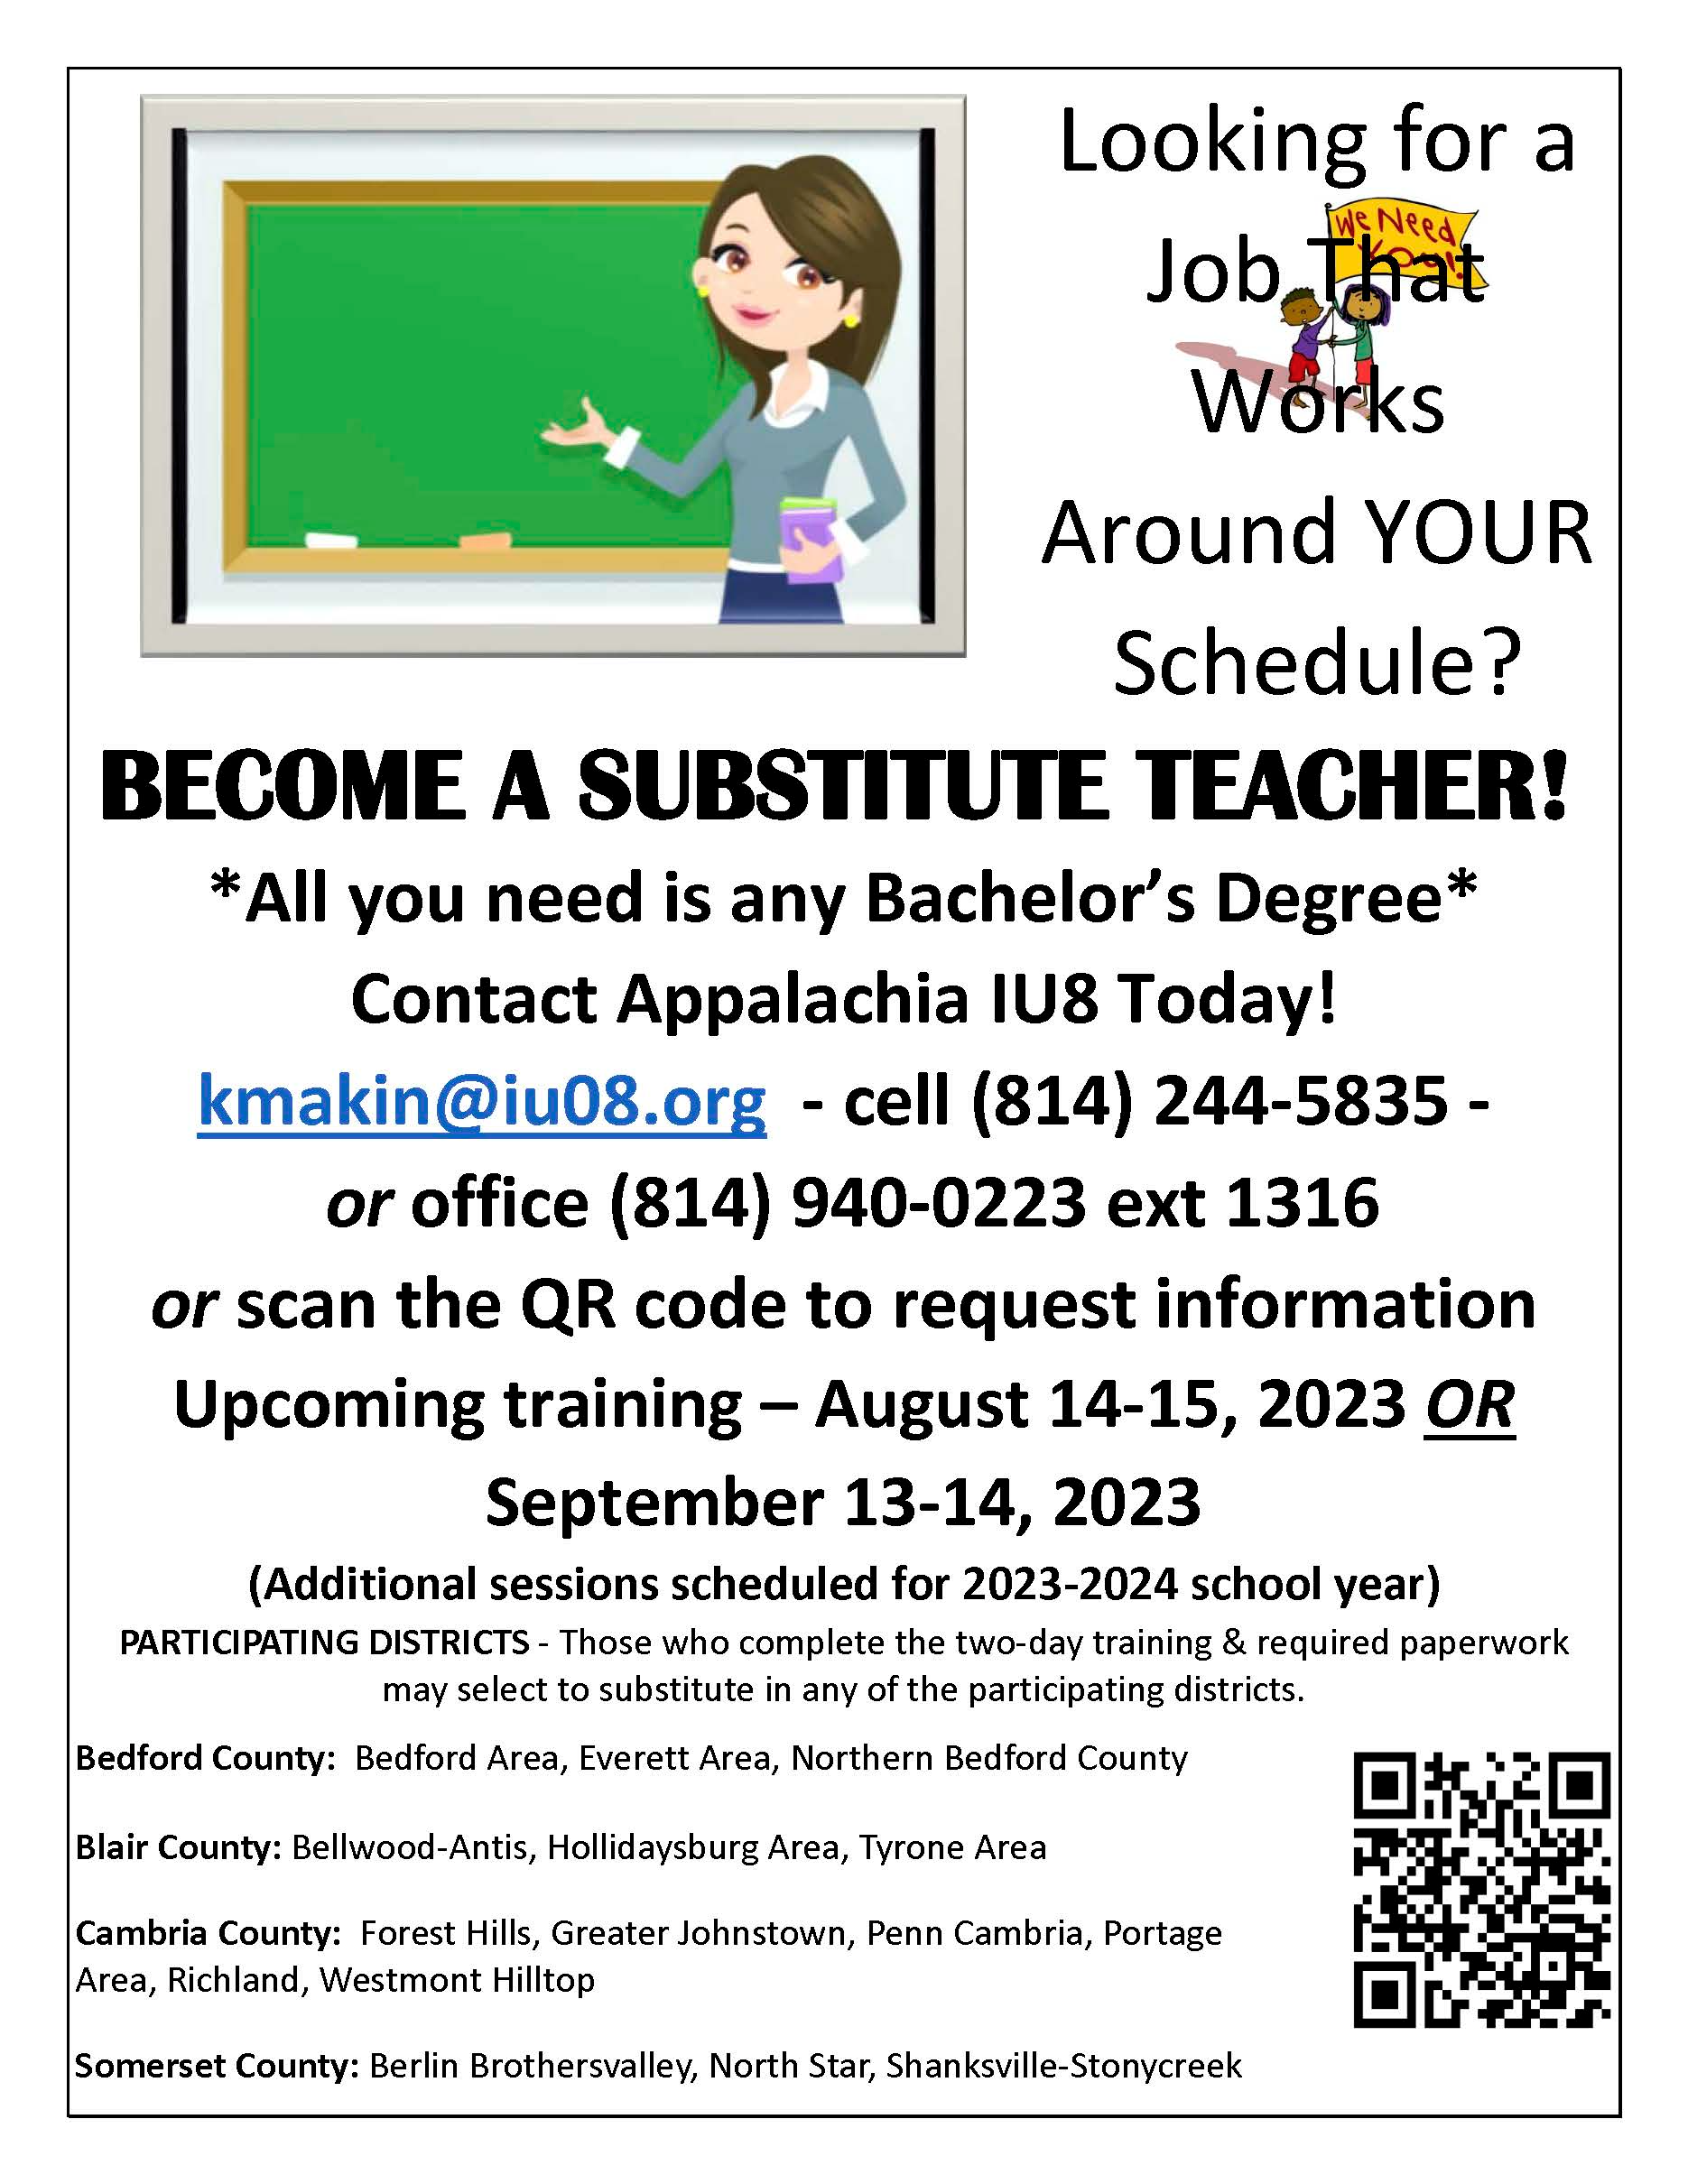 flyer with information about becoming a substitute teacher